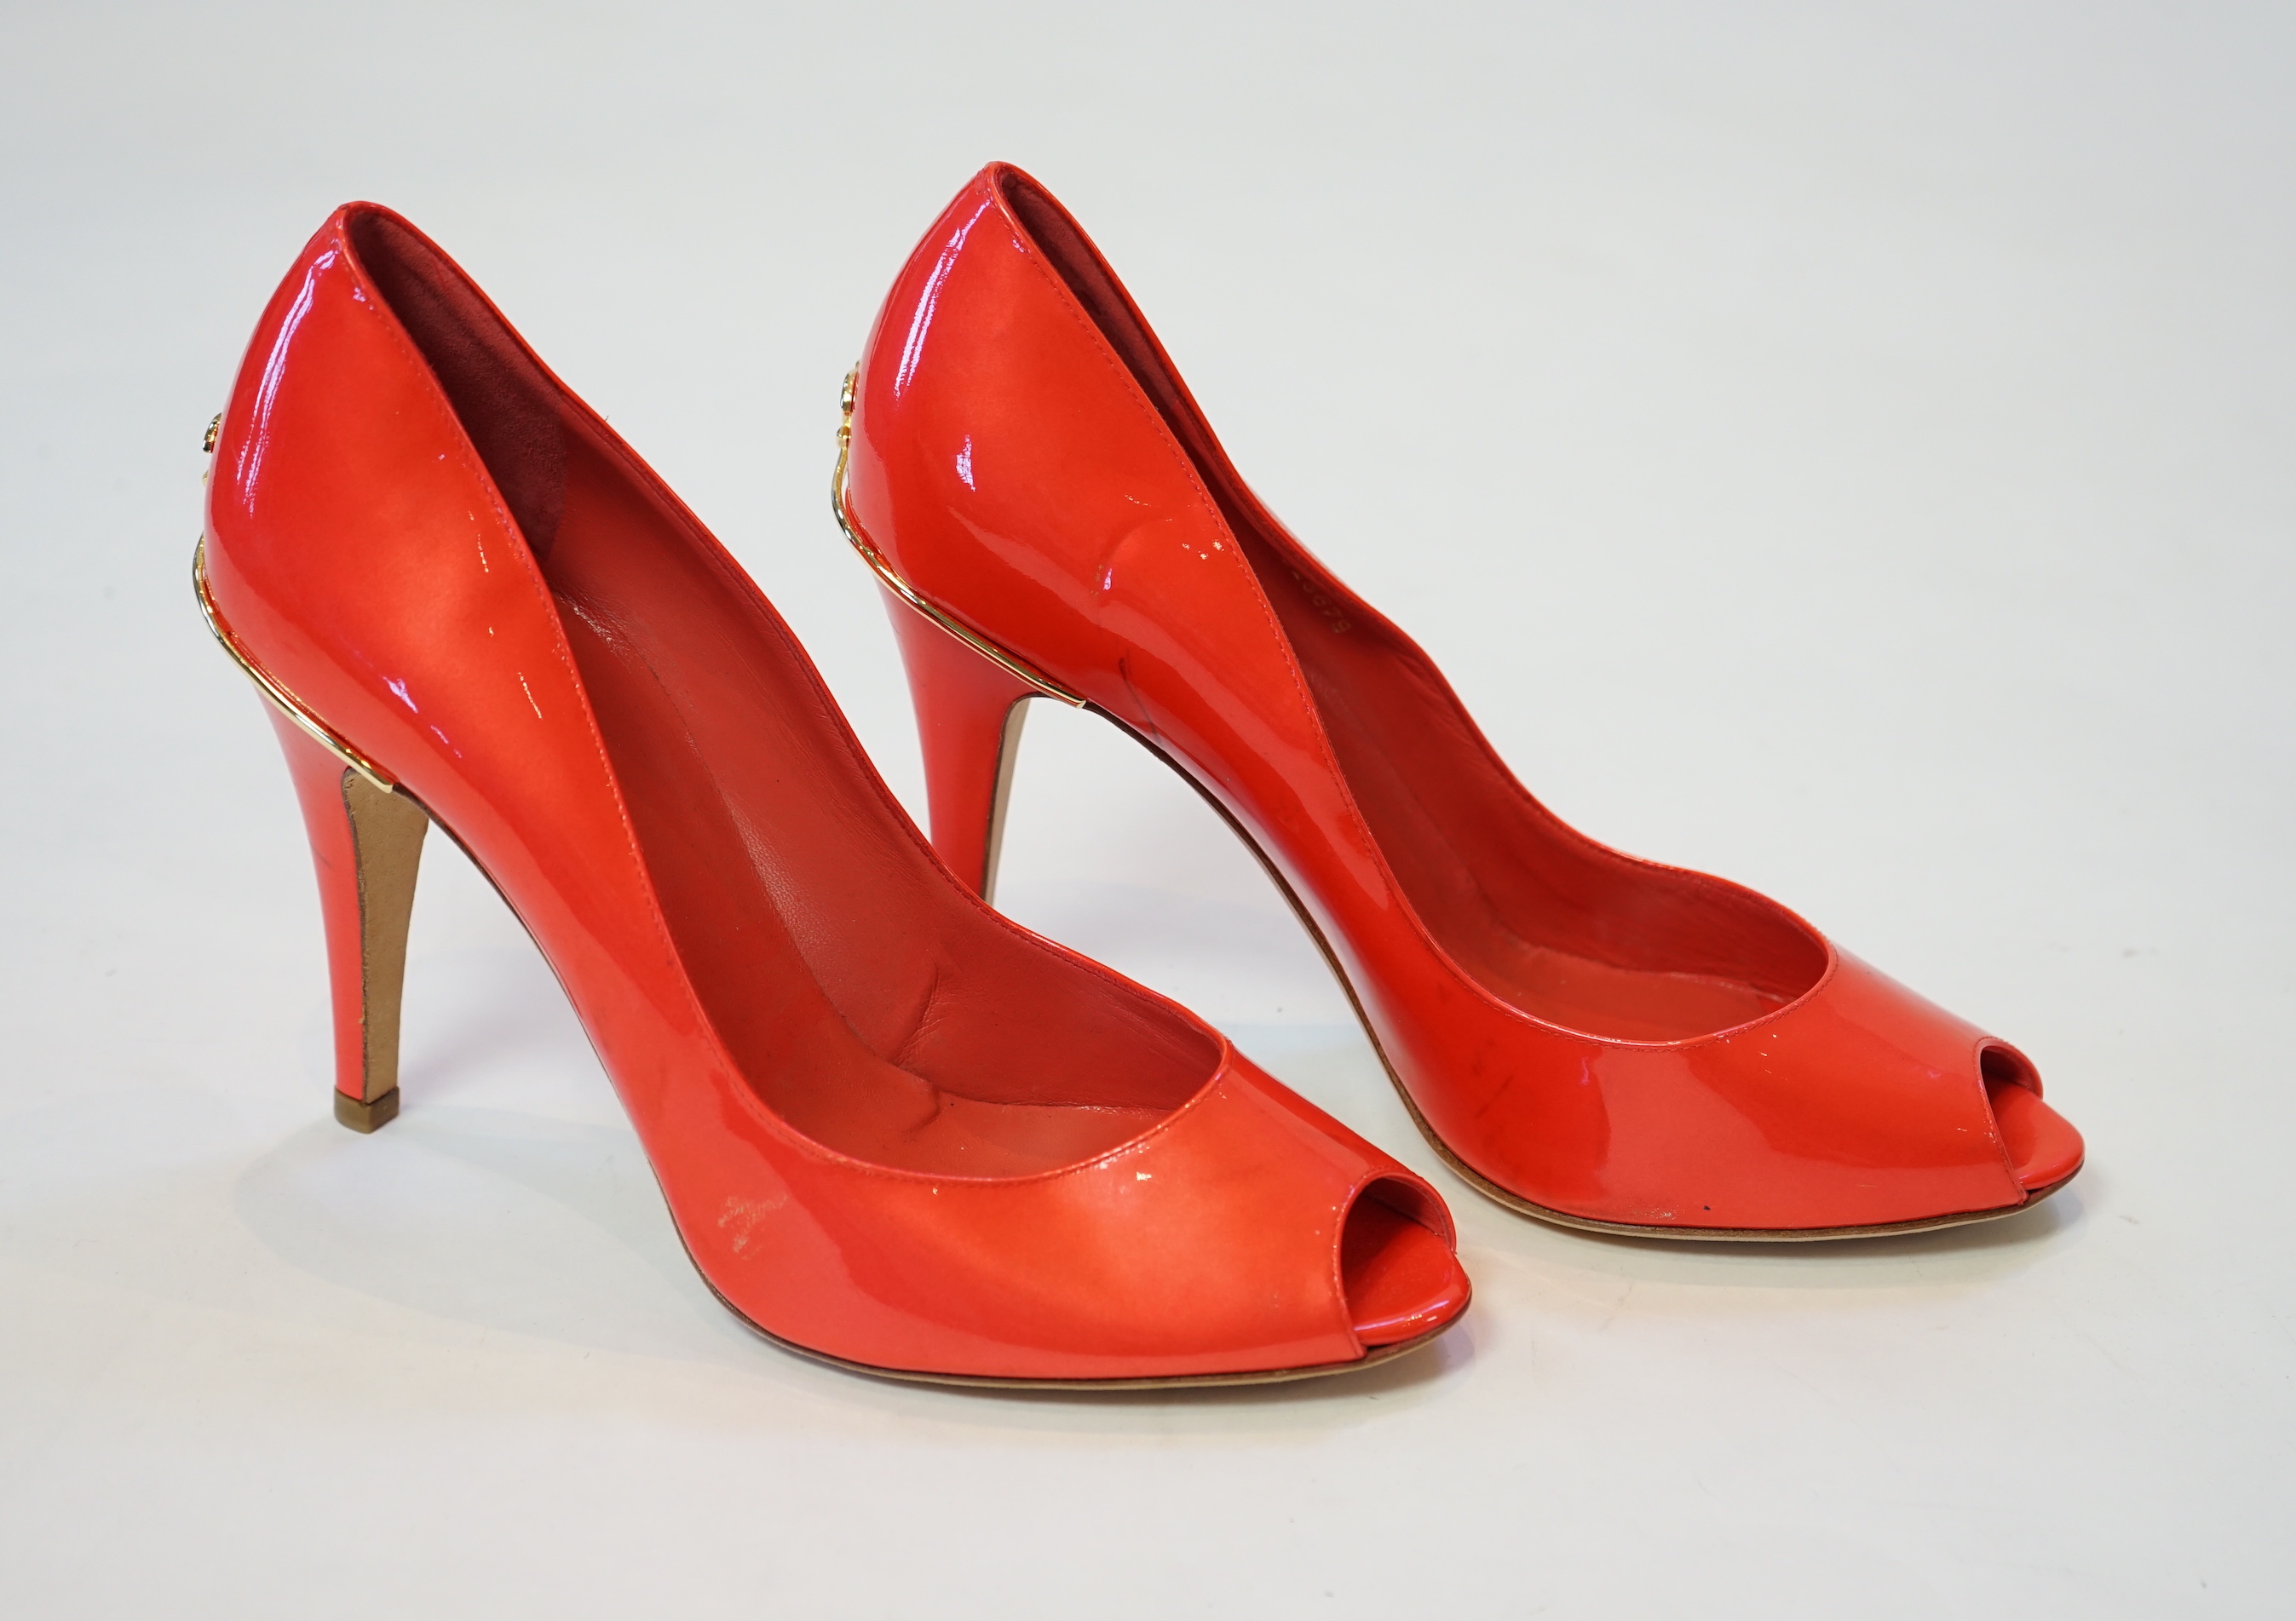 A pair of Chanel lady's metallic coral peep toe patent leather heels, size EU 39.5